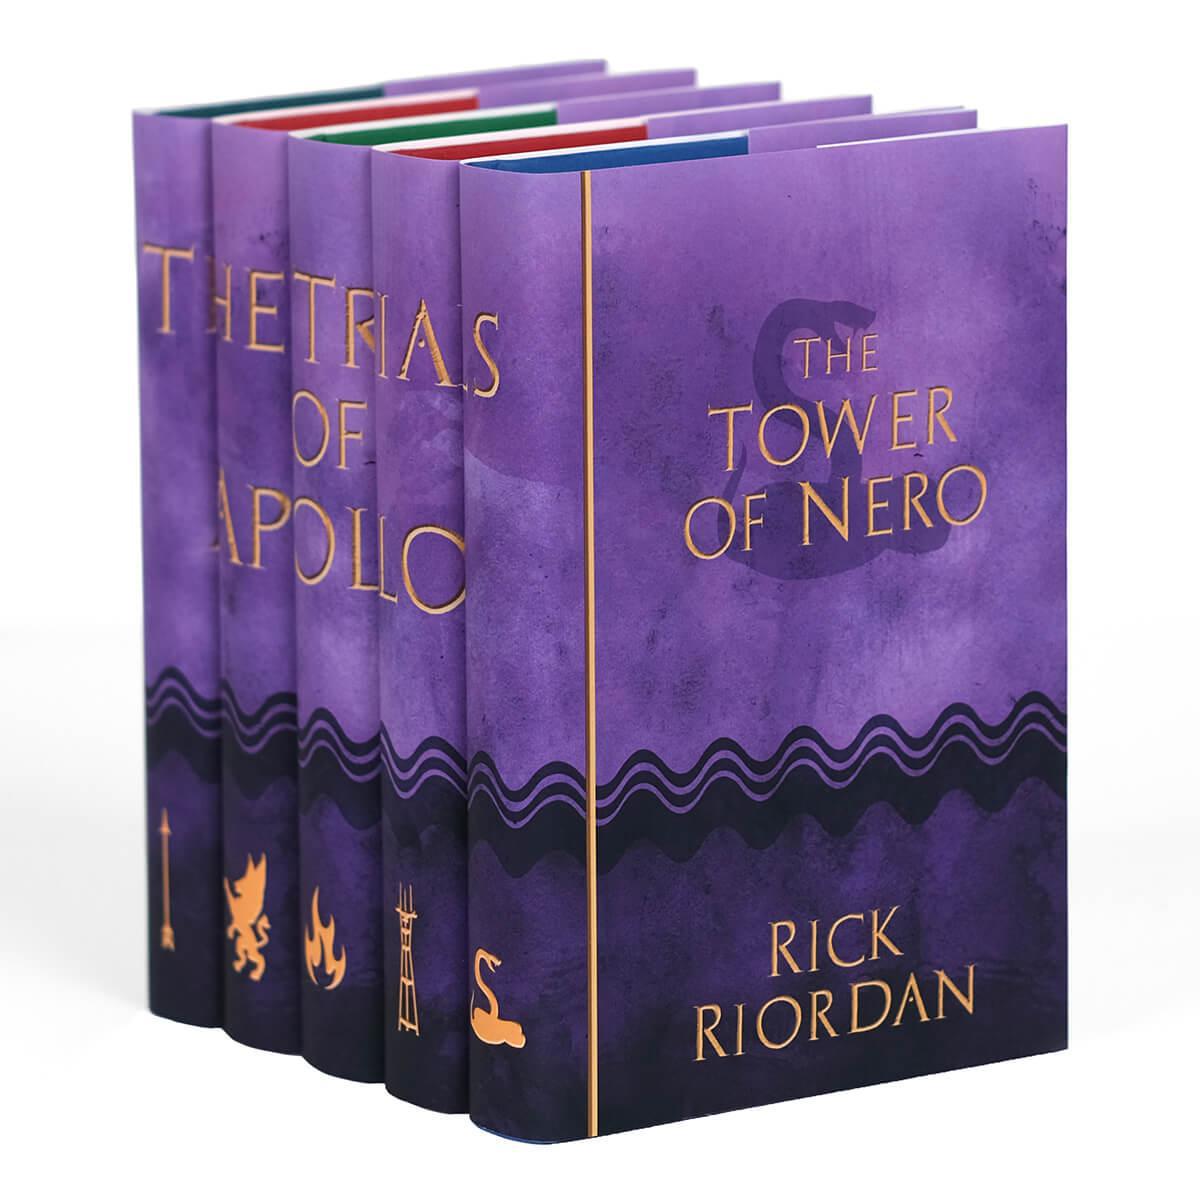 Cover designs for The Trials of Apollo custom collectible dust jackets. Each covers feature the book title and author and a symbol significant to the book.